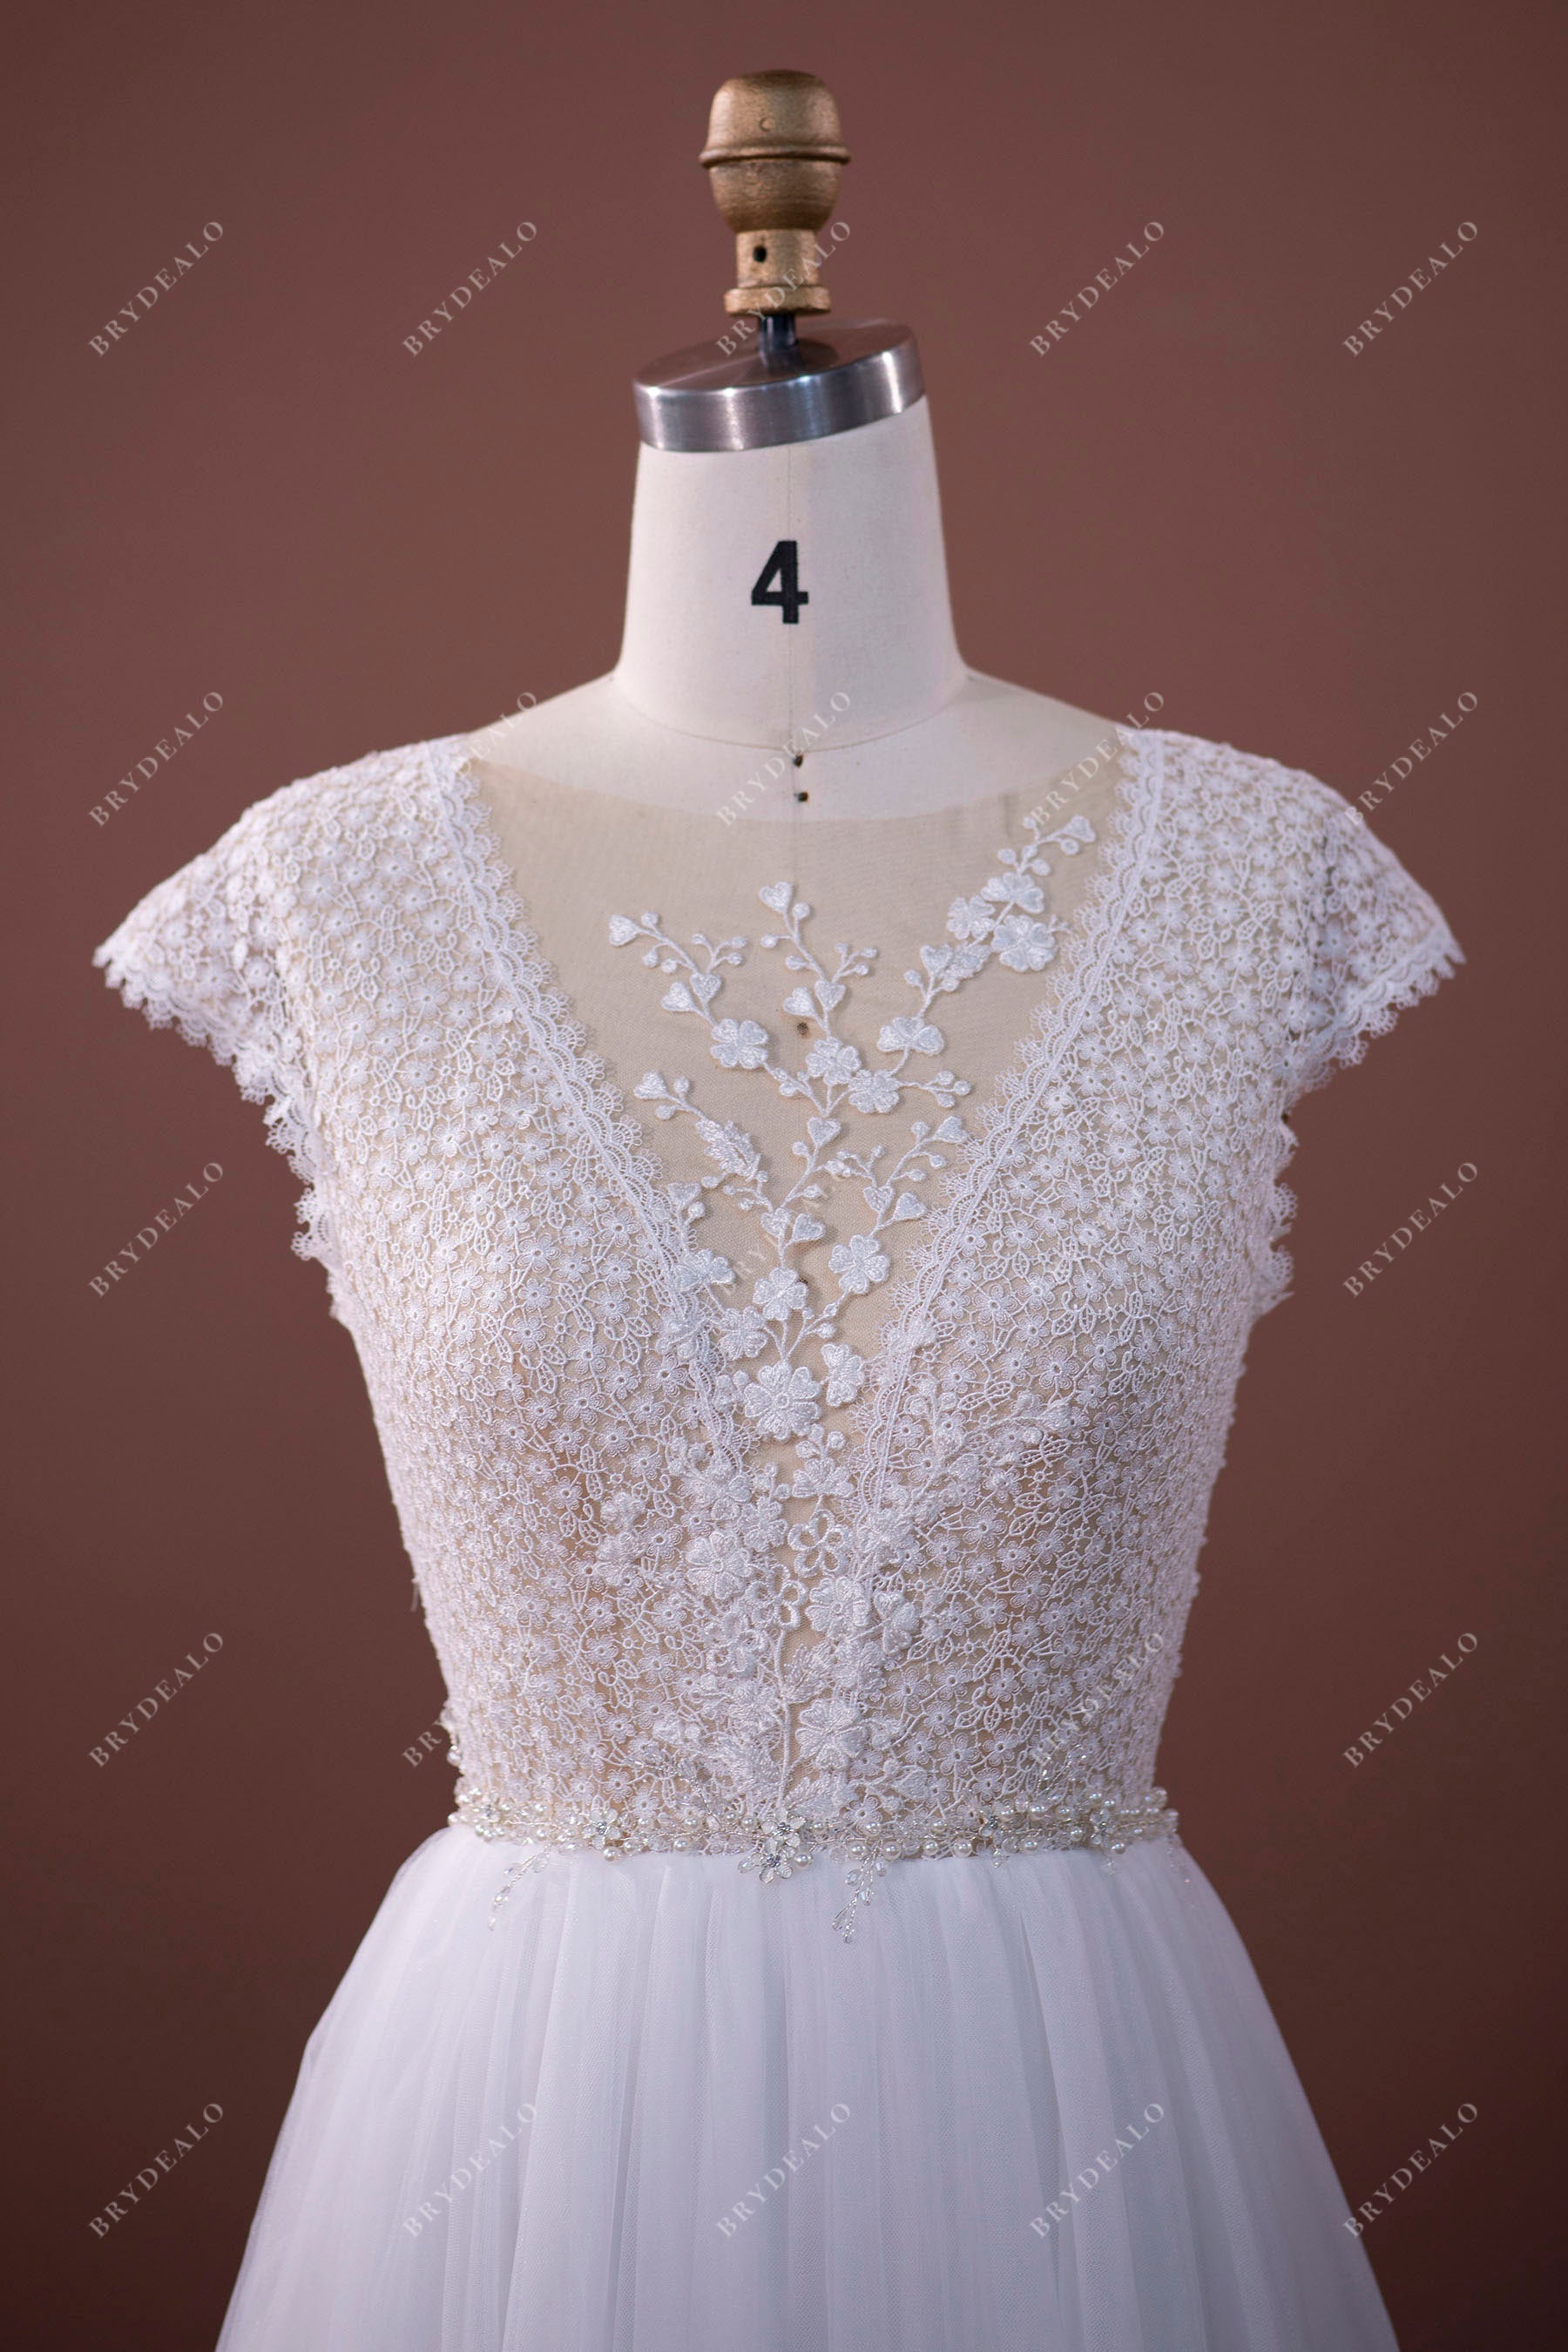 Plunging Neck Illusion Floral Lace Wedding Dress